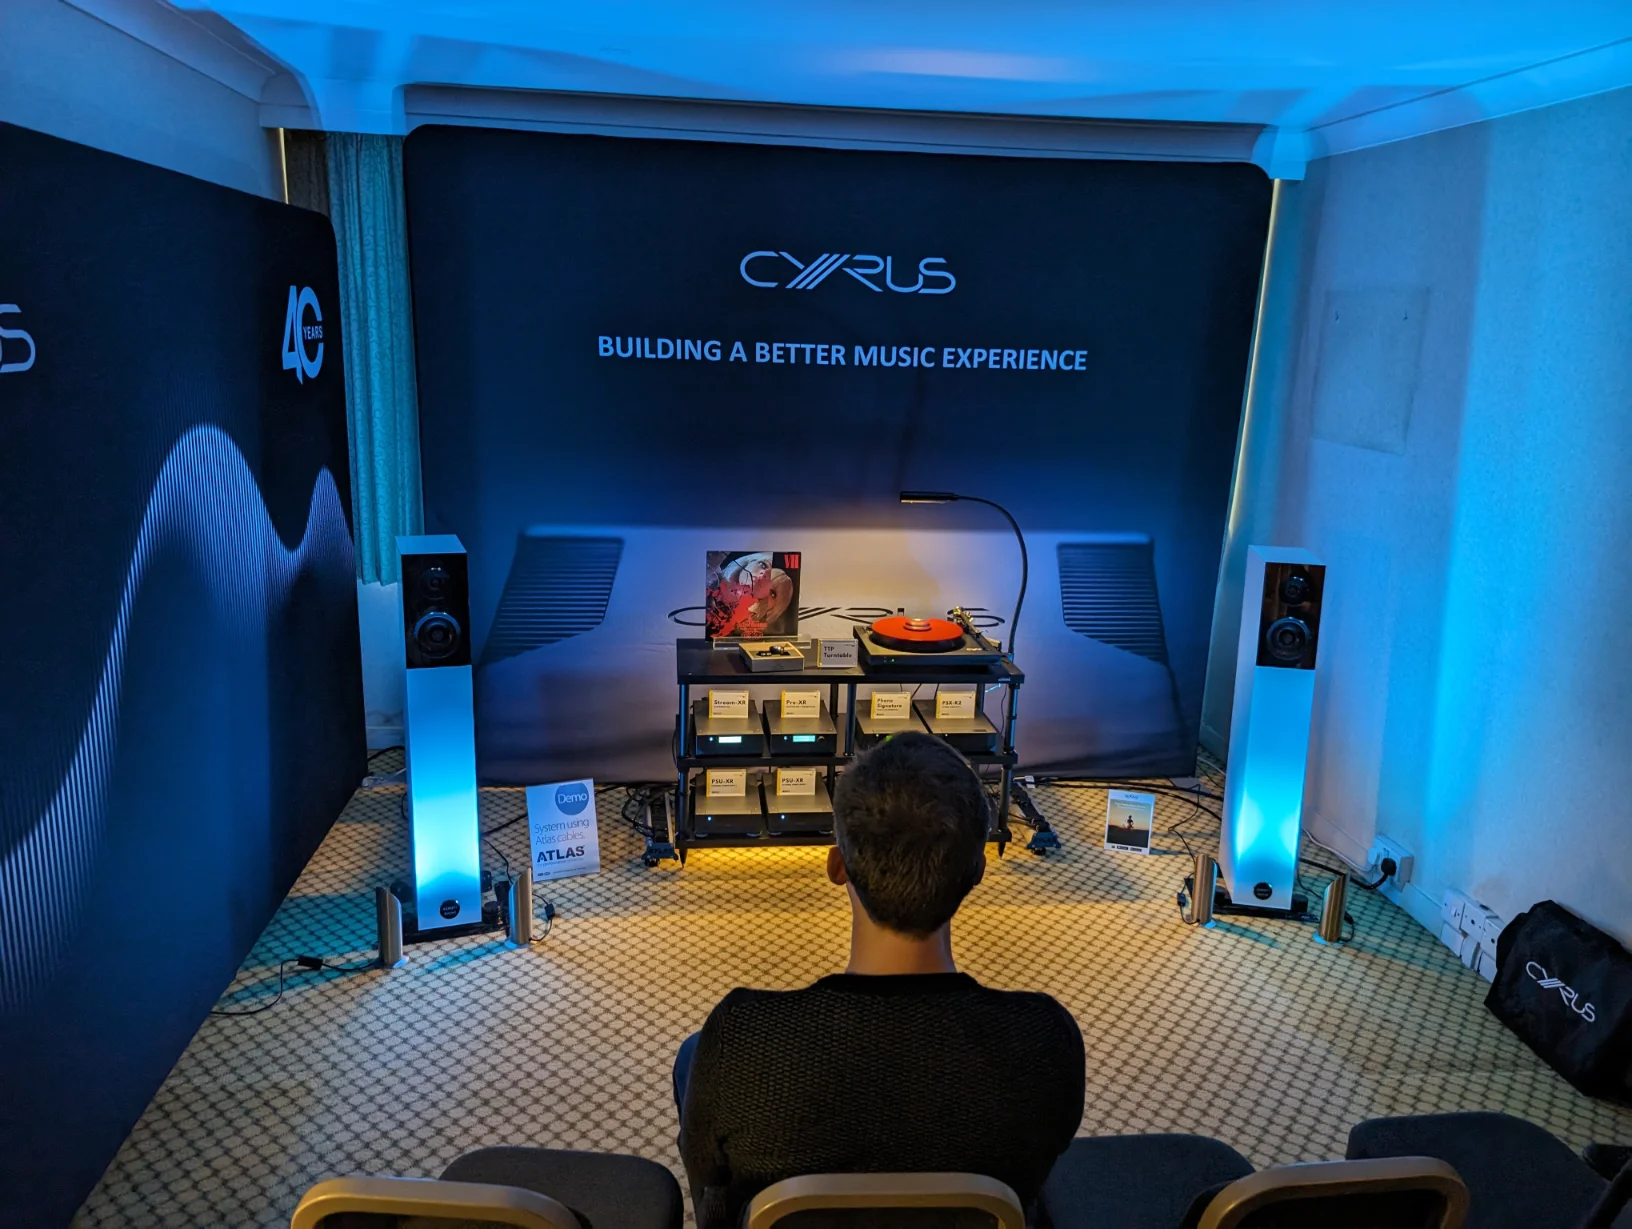 Cyrus have just started to distribute Audio Physics, I think this may have been the first show they’ve been partnered together. Good to see some new kit at the show as I don’t remember either being present in 2023!